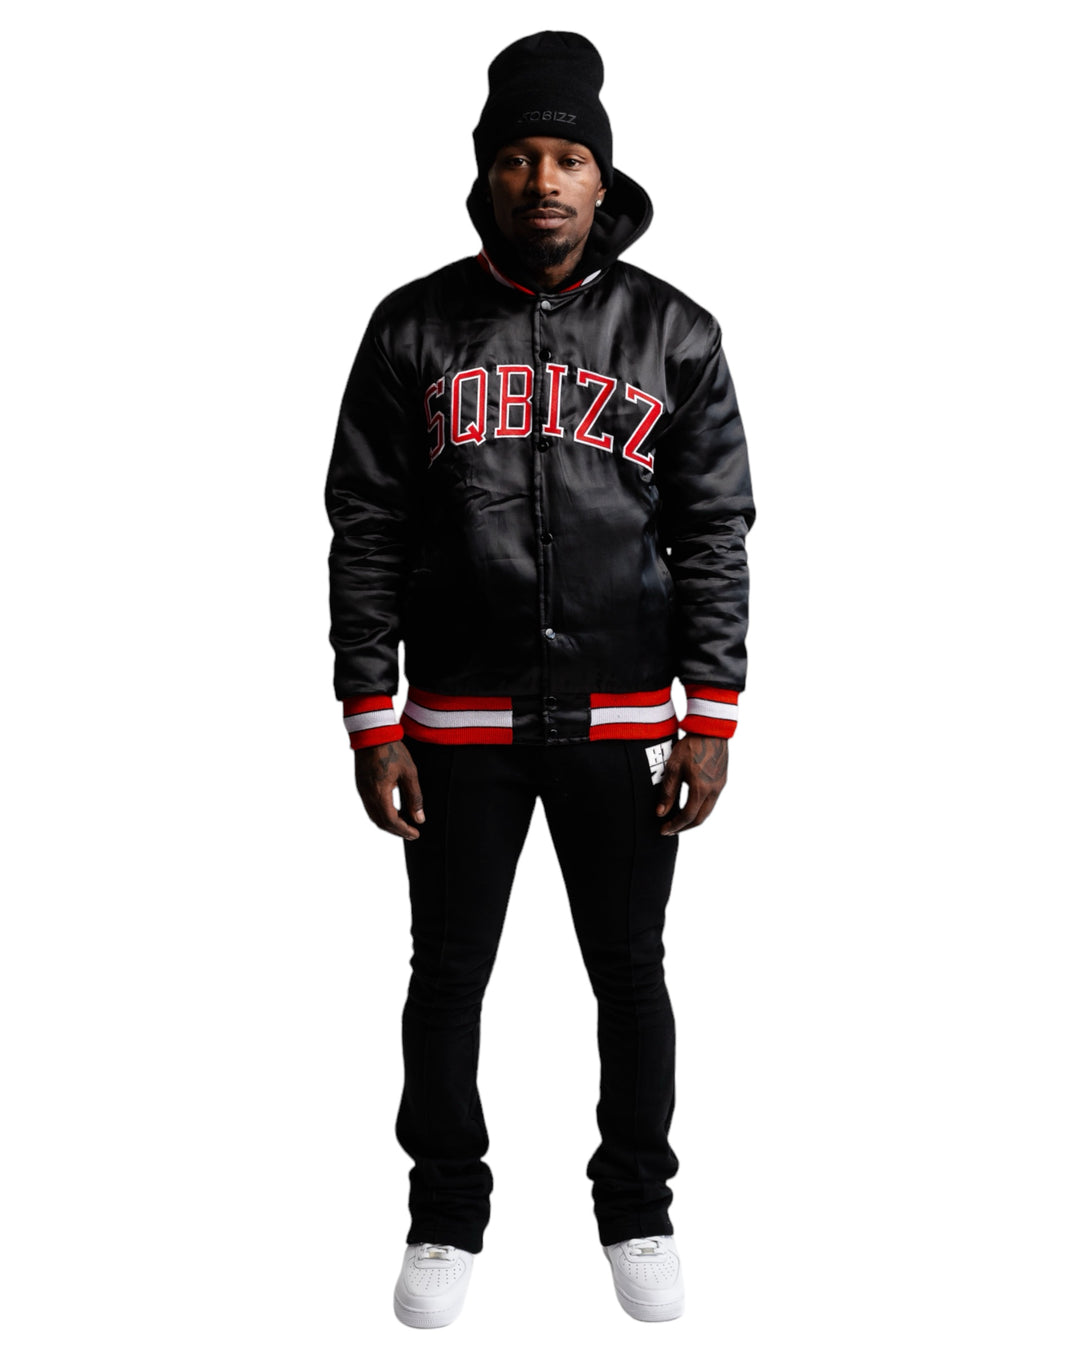 Arch Satin Jacket in Black/Red